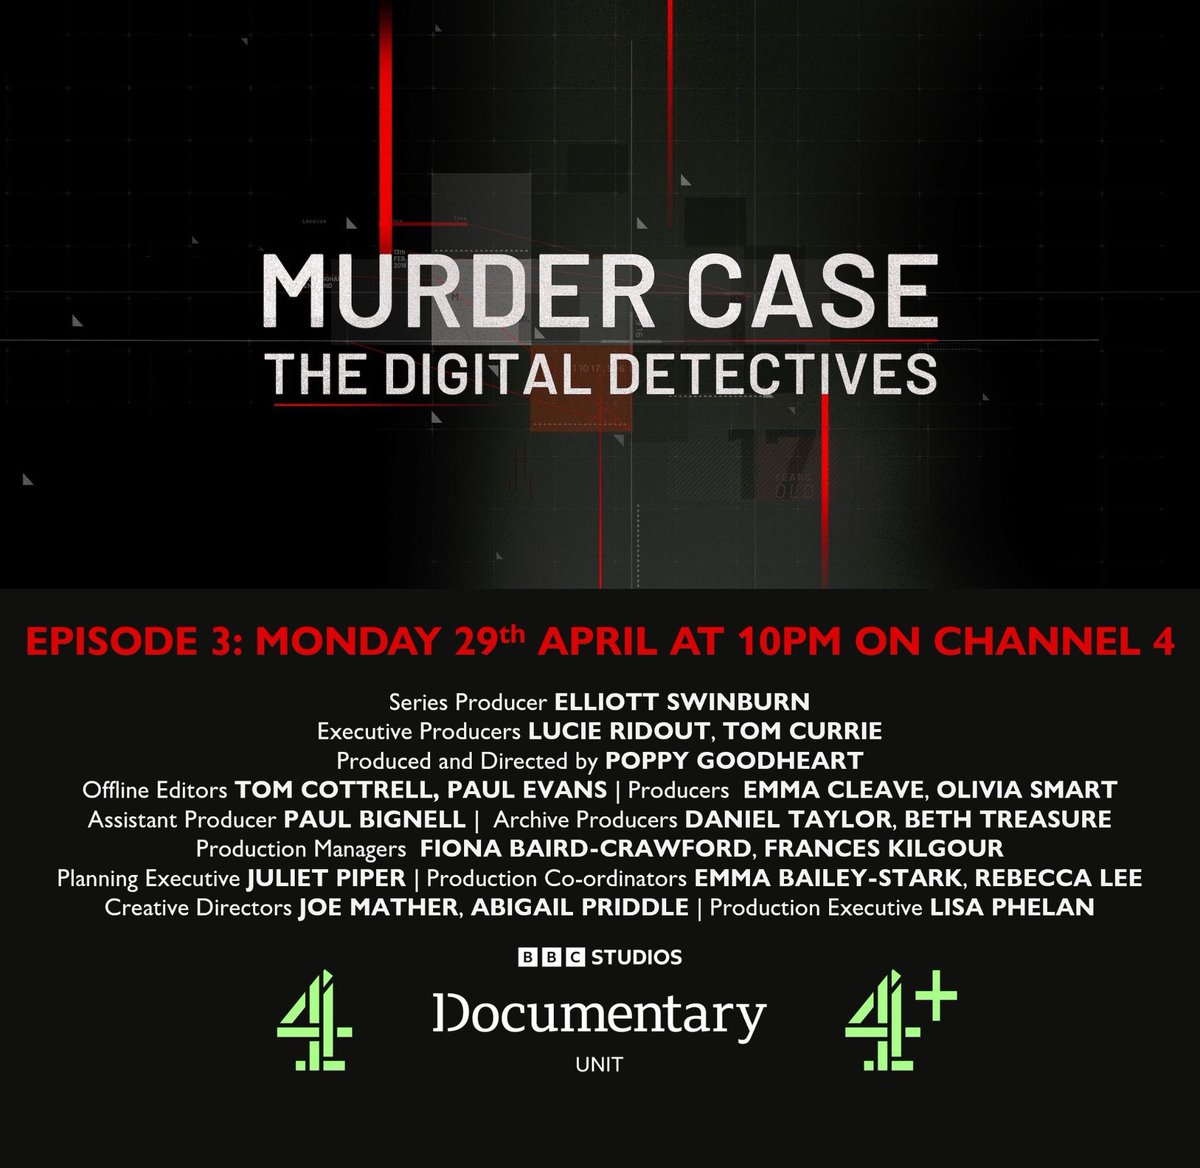 Proud to share my latest doc ‘Murder Case: The Digital Detectives’ on C4 tonight about the tragic death of 13-year-old Olly Stephens. It was a privilege to work with Olly’s incredible family. Huge thanks also to @ThamesVP @bbcstudios @Channel4 #murdercase #digitaldetectives